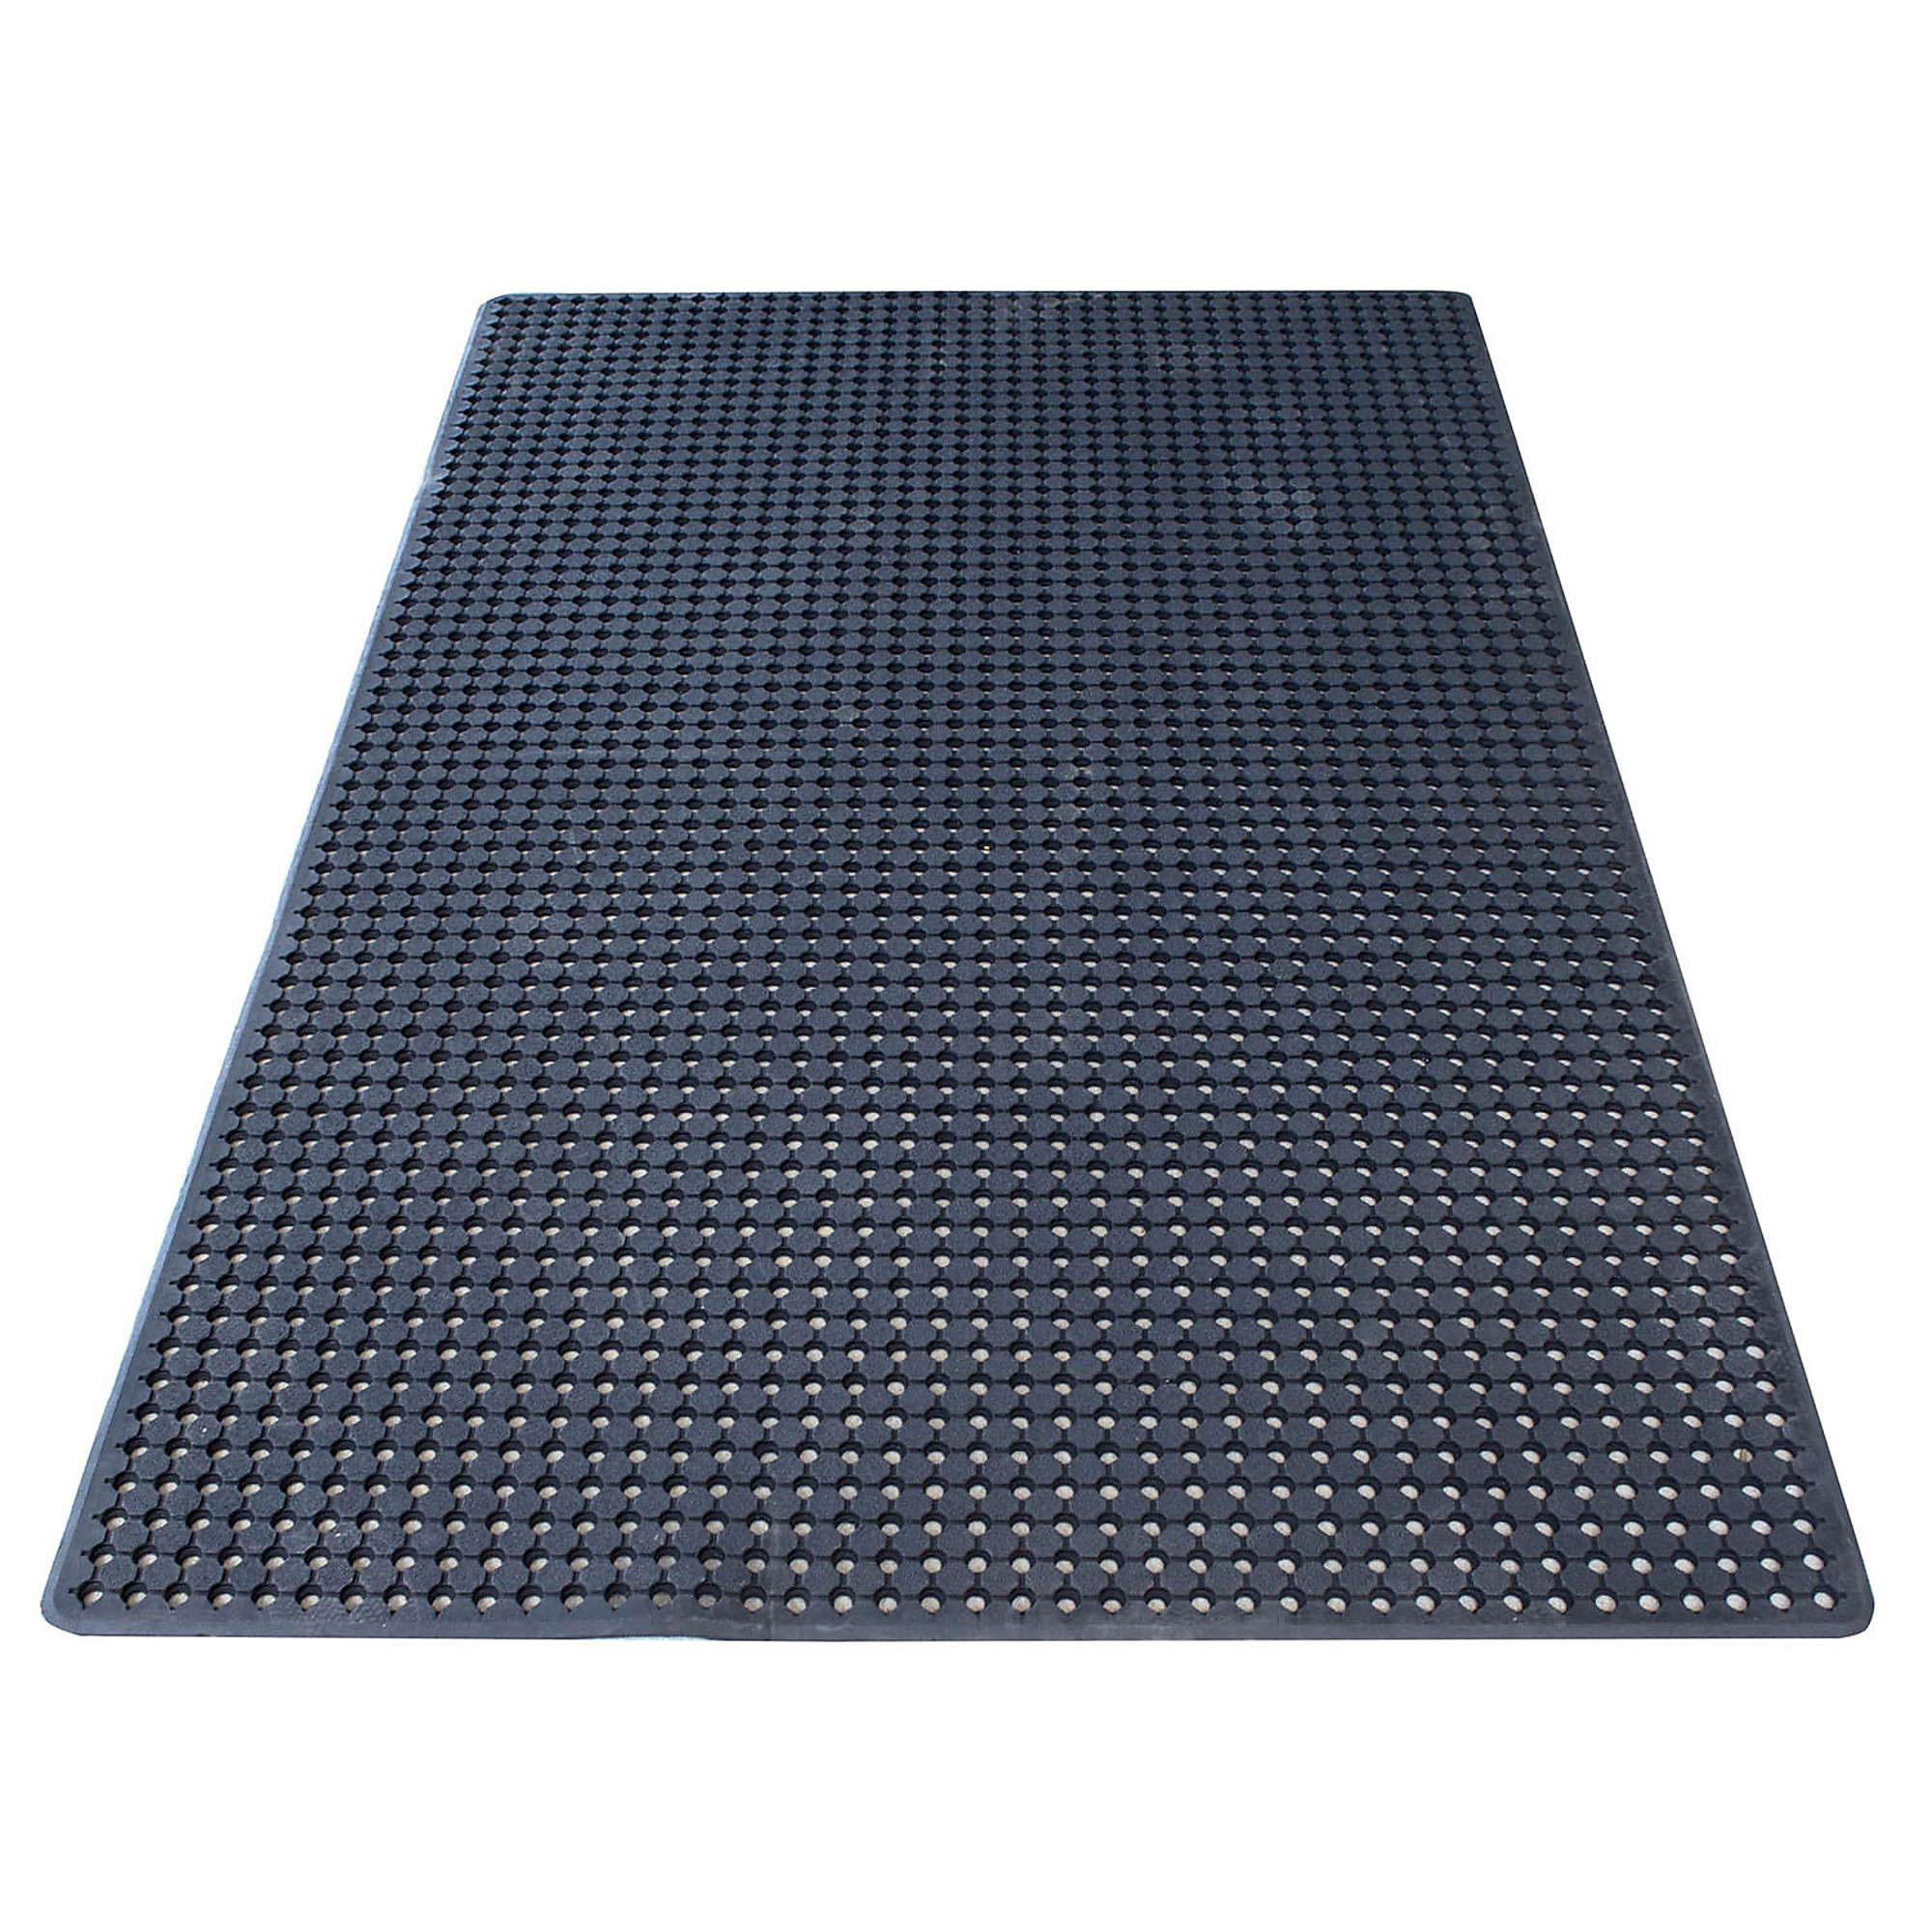 Buffalo Tools, 4 x 6ft. Truck Bed Utilty Mat, Primary Color Black, Model TBM46